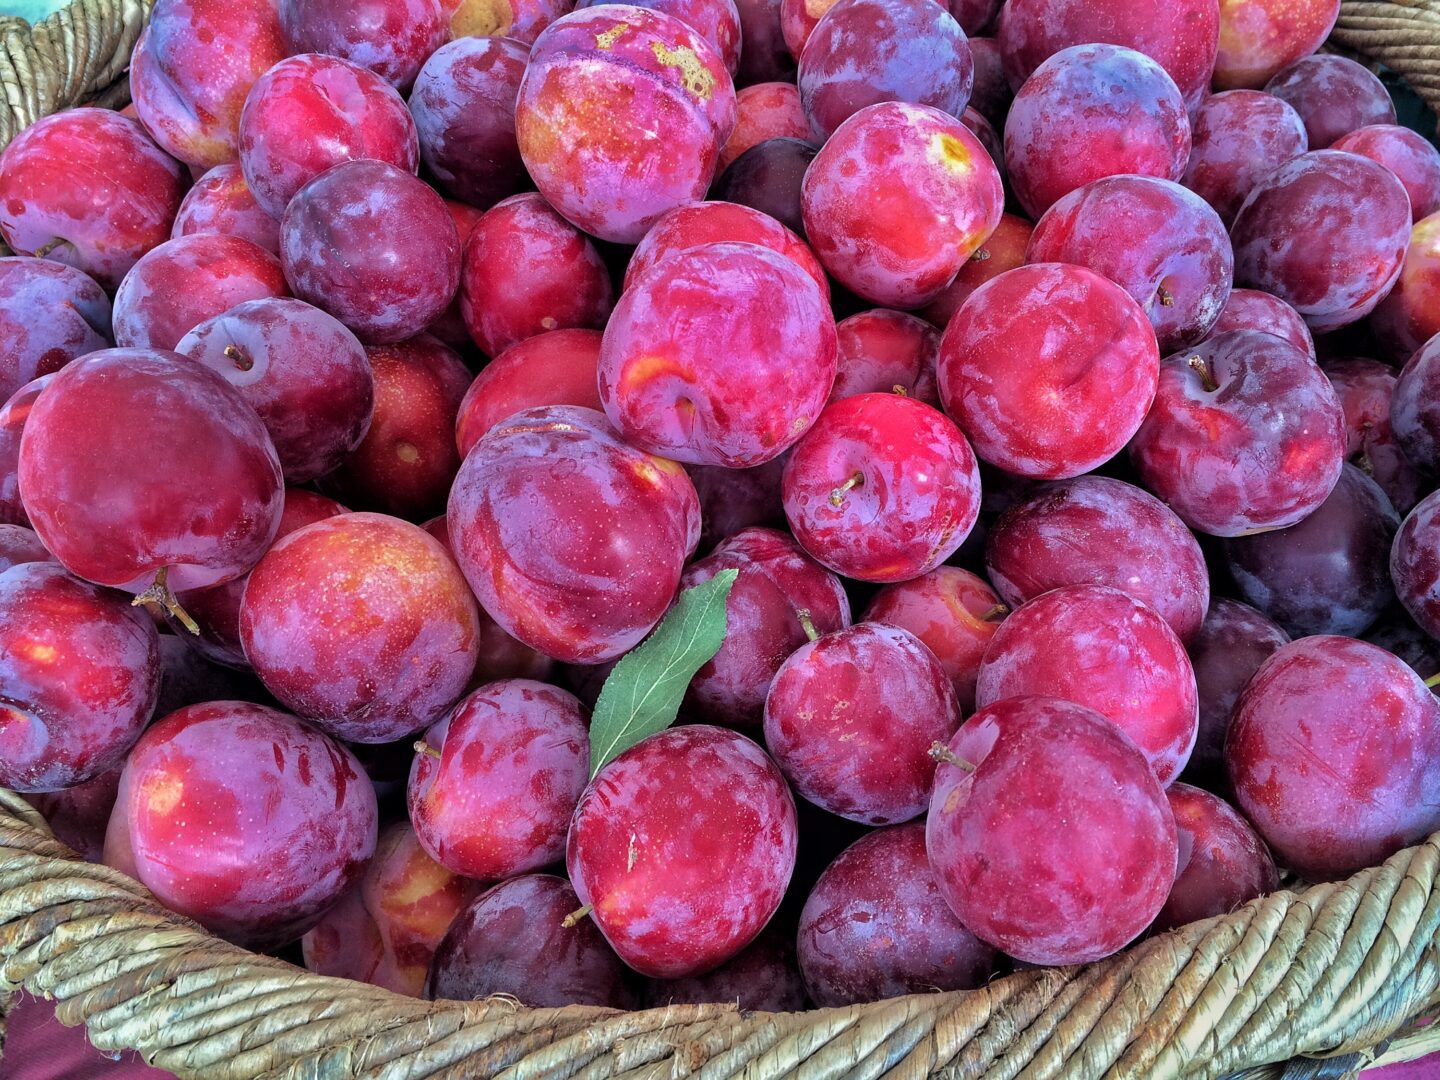 San Rafael’s Thursday Farmers Market in July-snapshots of what’s happening.